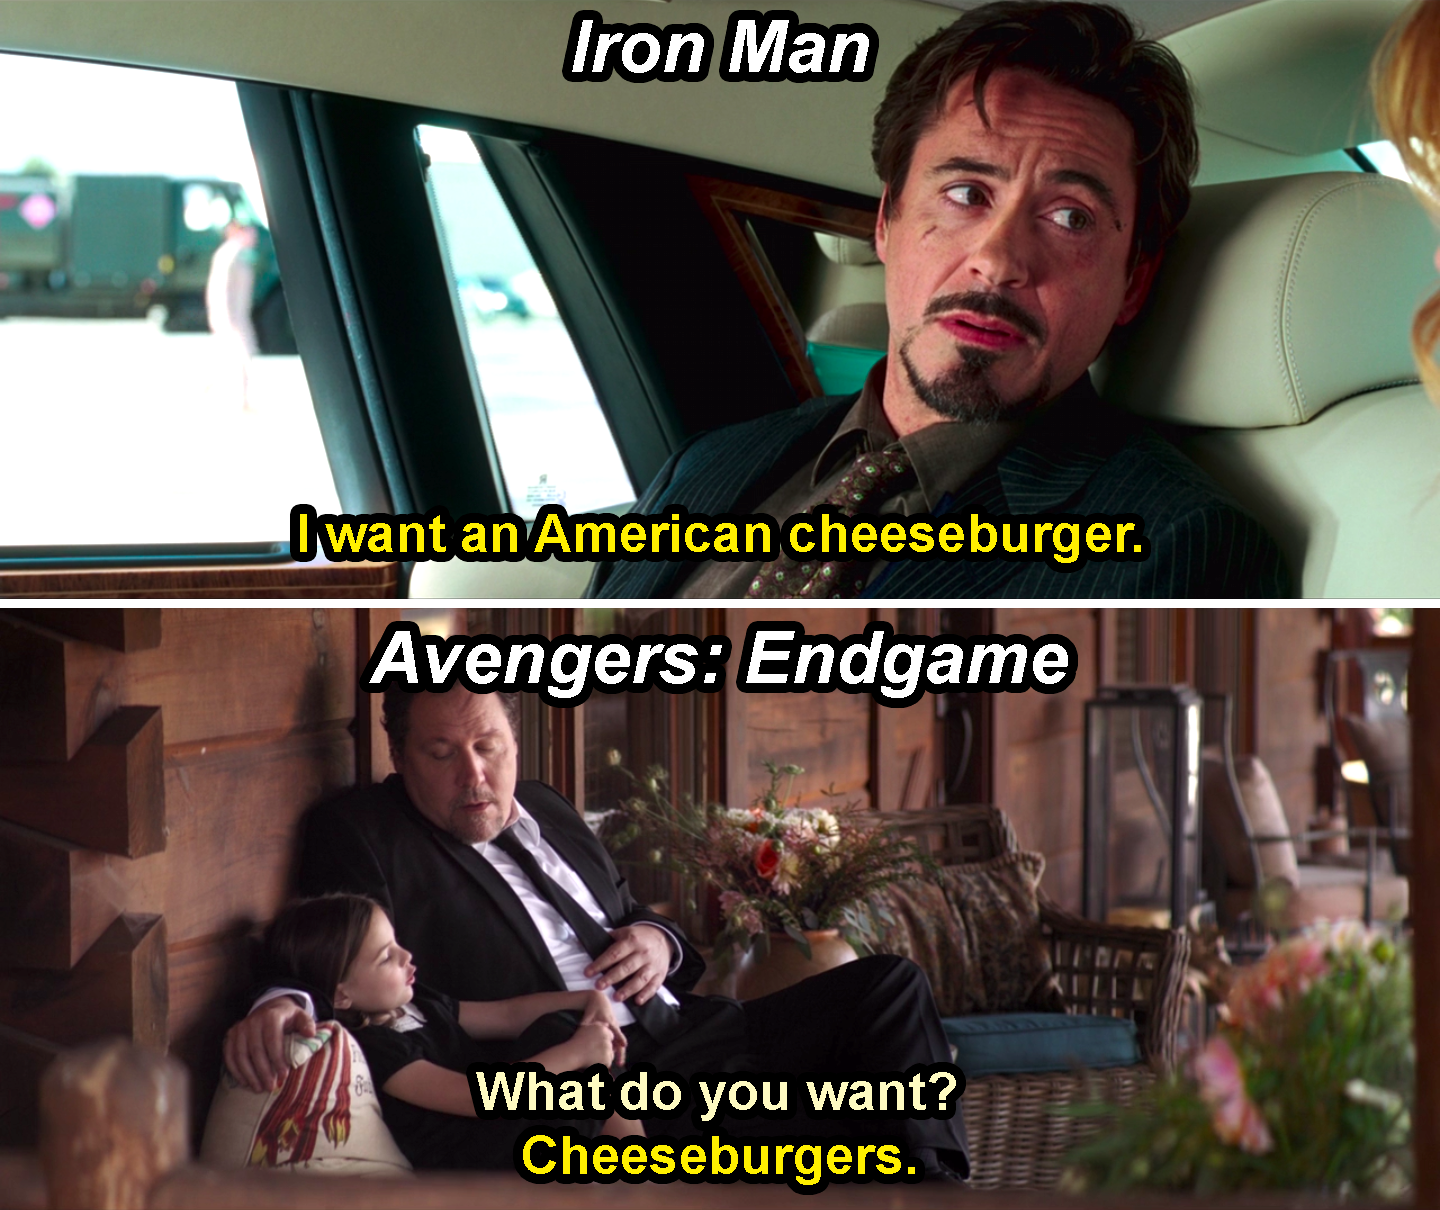 Tony Stark saying, &quot;I want an American cheeseburger,&quot; in Iron Man and Morgan Stark responding to Happy Hogan asking her what she wants with &quot;Cheeseburgers,&quot; in Avengers: Endgame